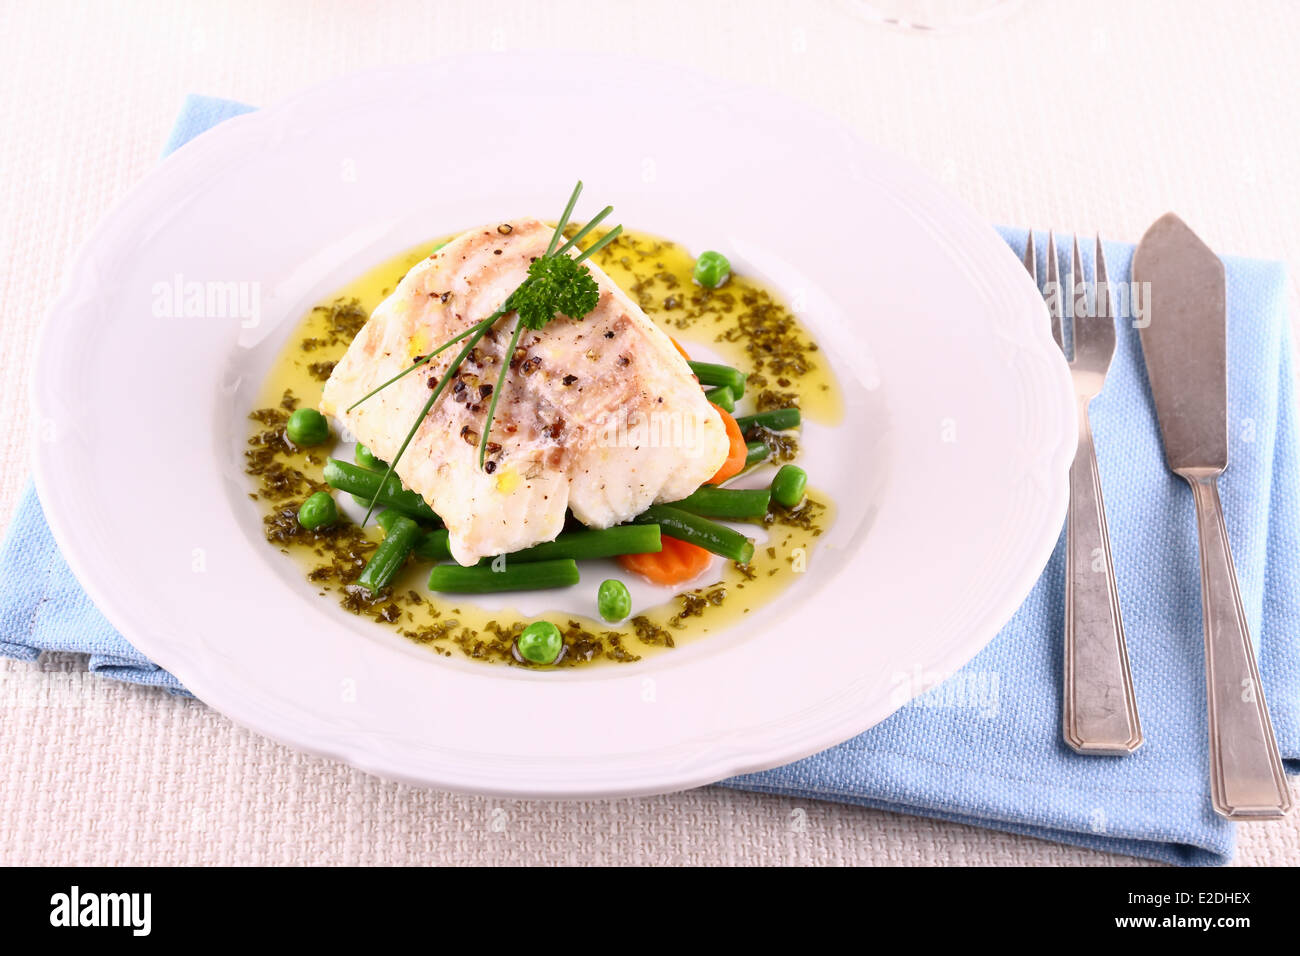 Cod fillet with green beans, peas, parsley, olive oil, close up Stock Photo